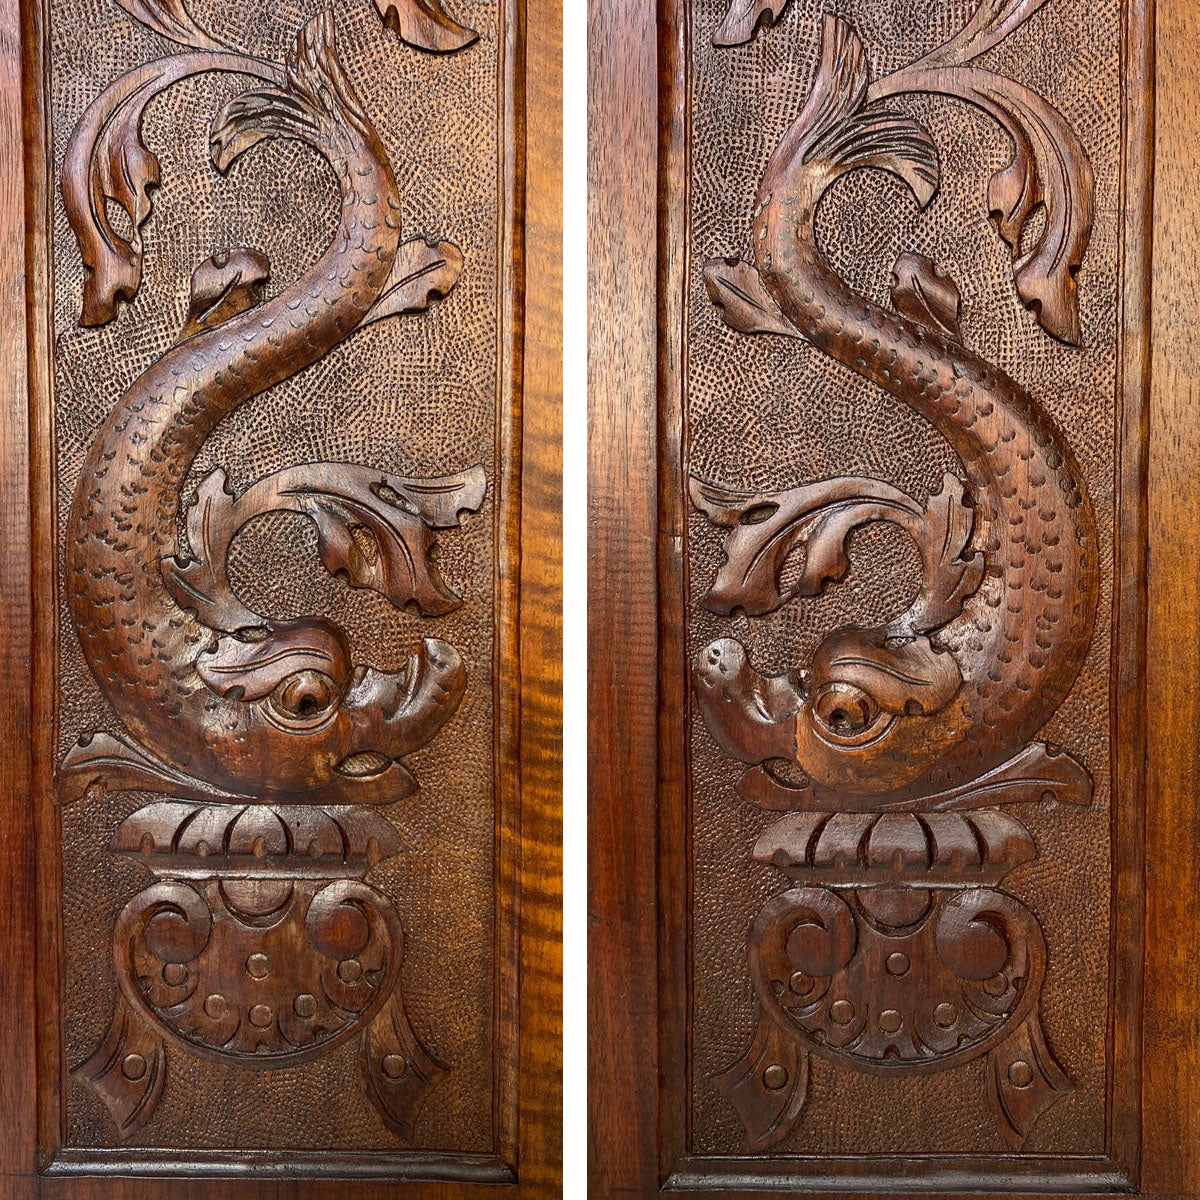 Antique Victorian Carved Walnut Furniture or Cabinet Door Panel PAIR, Architectural, Serpent Figures